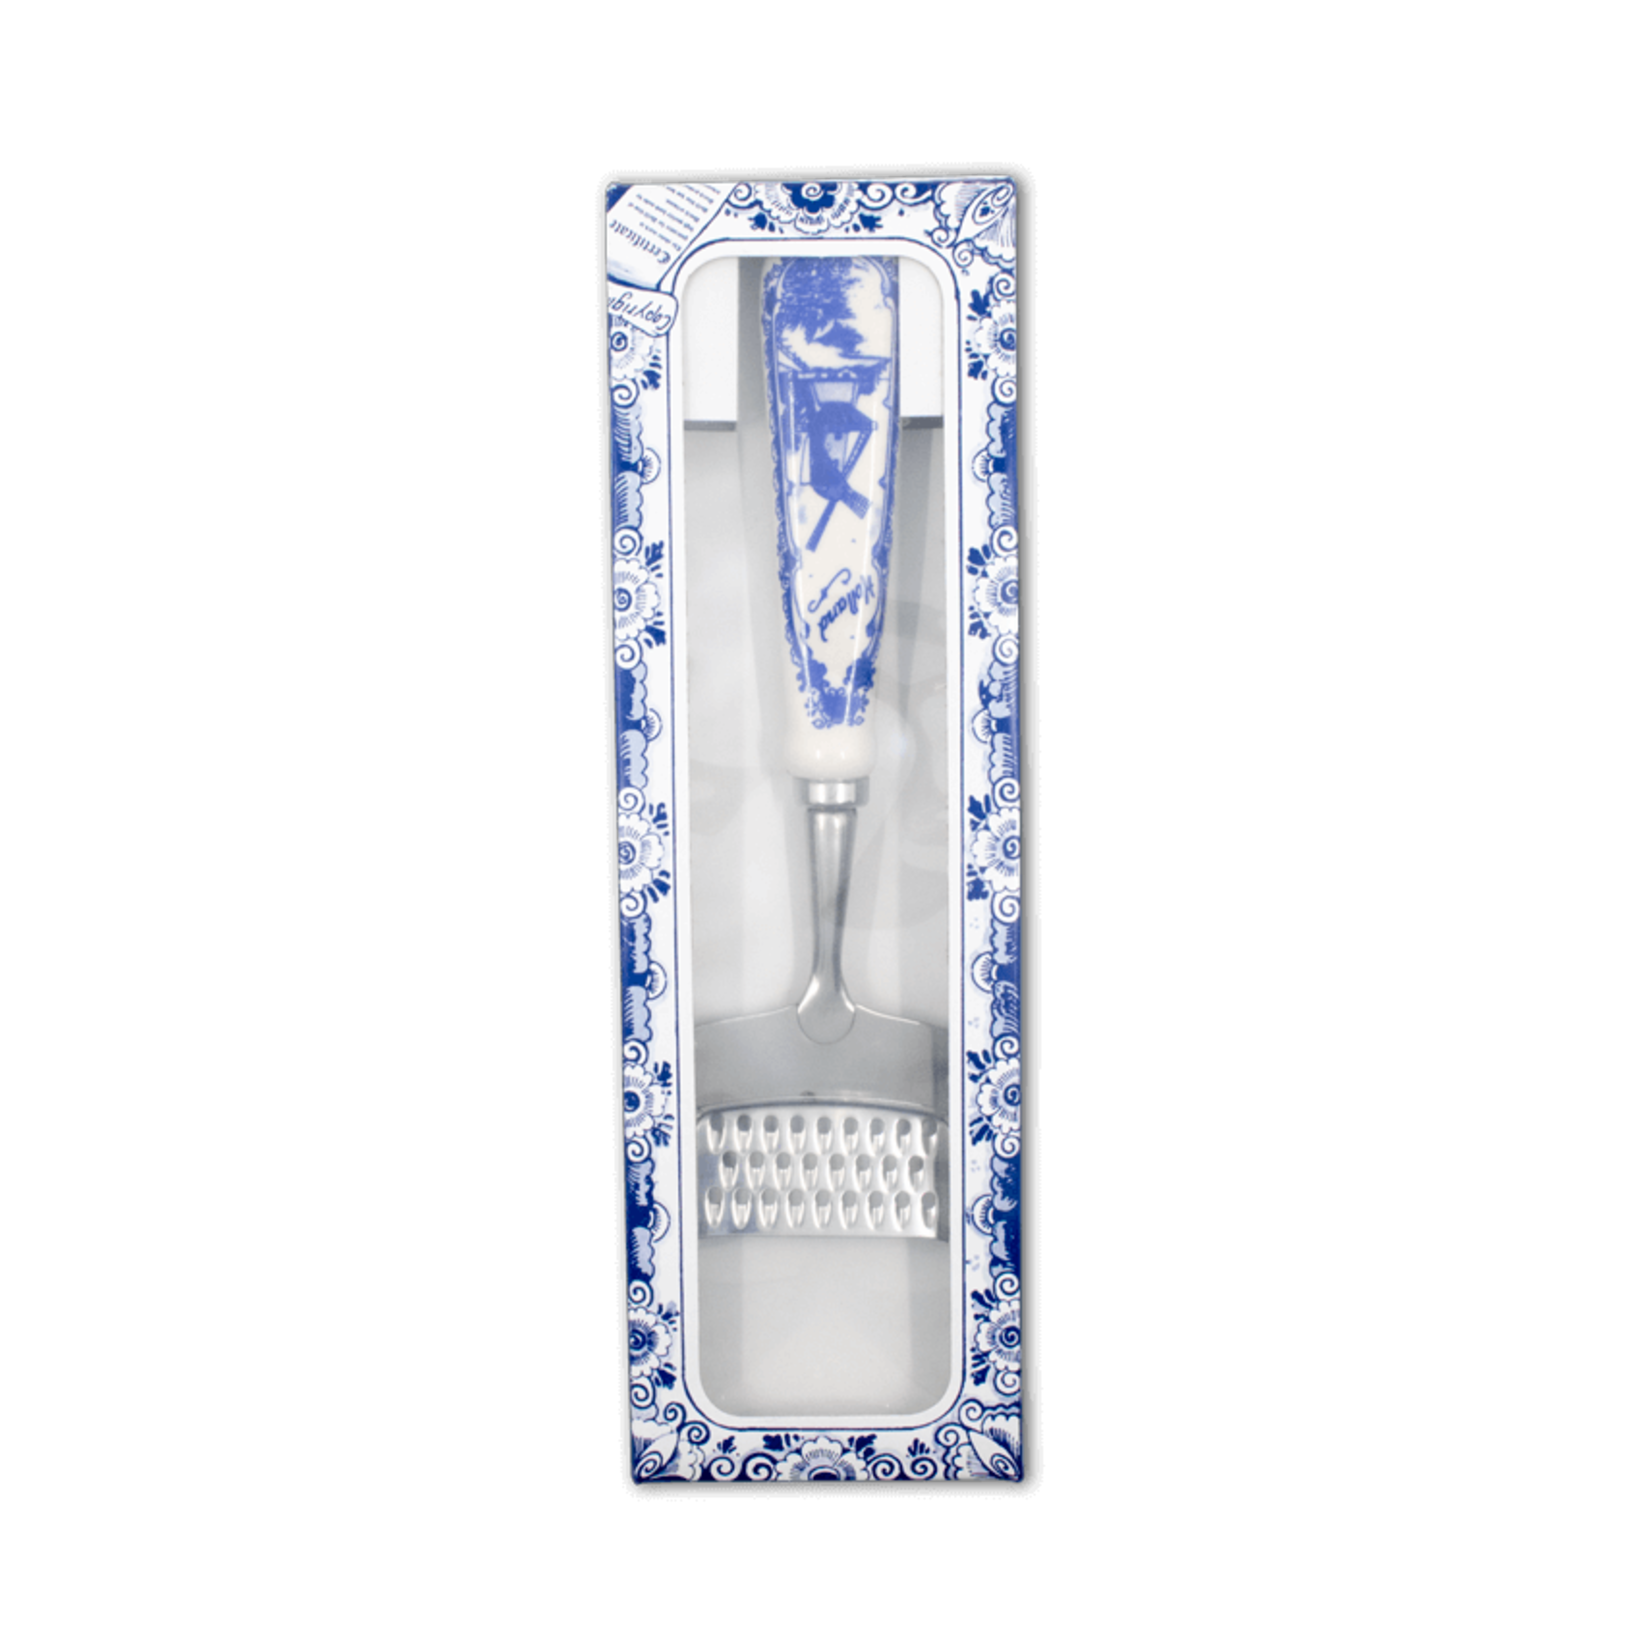 Delft Handle Cheese Grater 1367